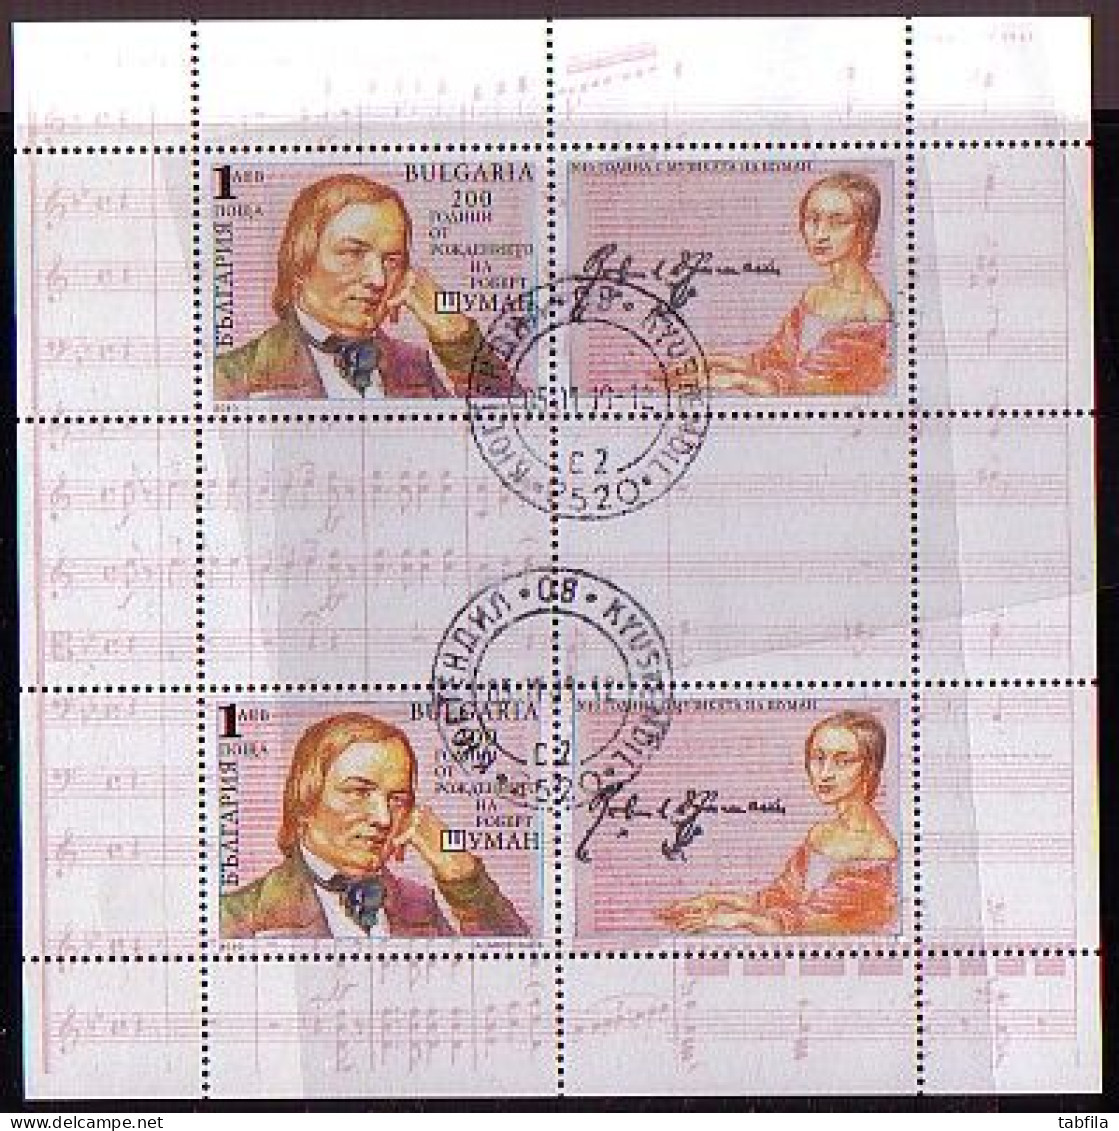 BULGARIA - 2010 - Anniversary Of The Birth Of The Composer Robert Schumann + Emanuil Jordanov - 2 MS MNH - Used Stamps